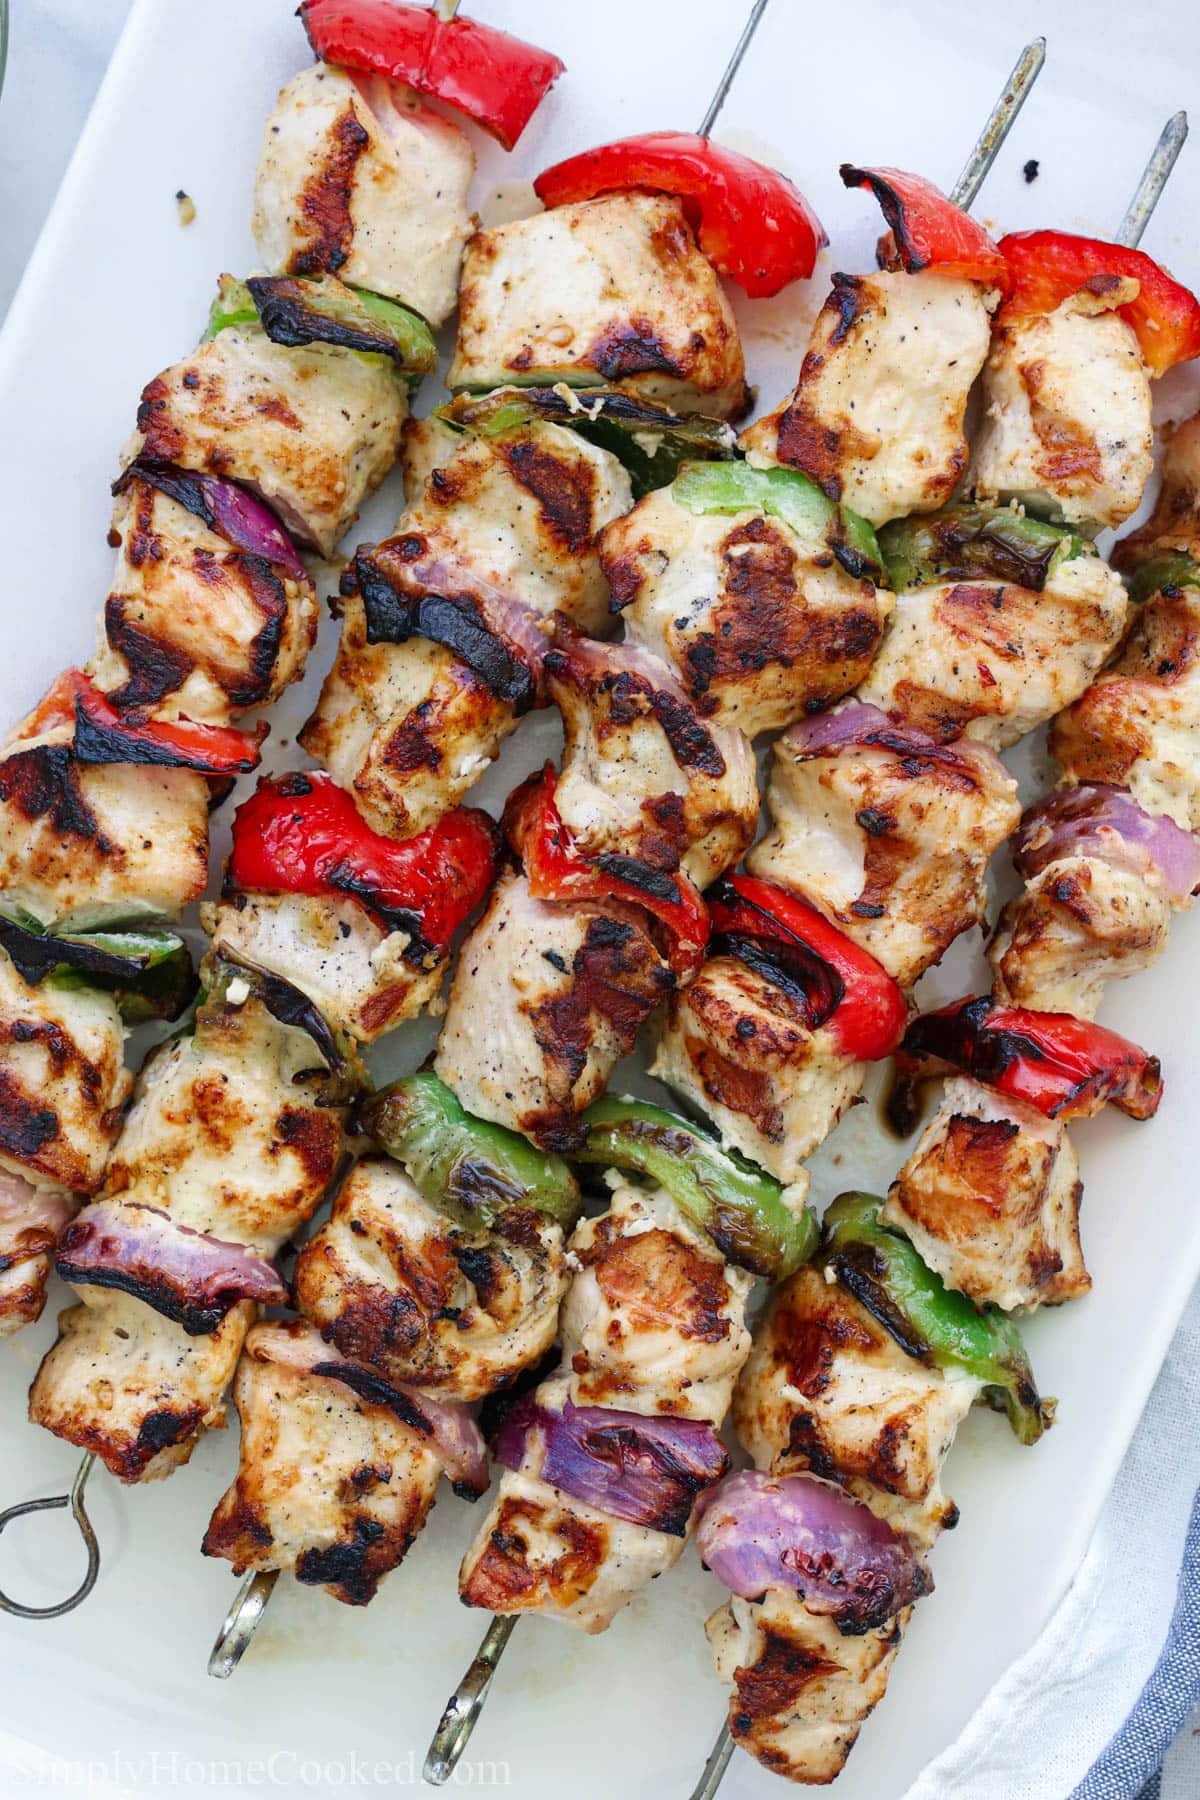 Grilled chicken kabobs with red onion and green and red pepper pieces on metal skewers